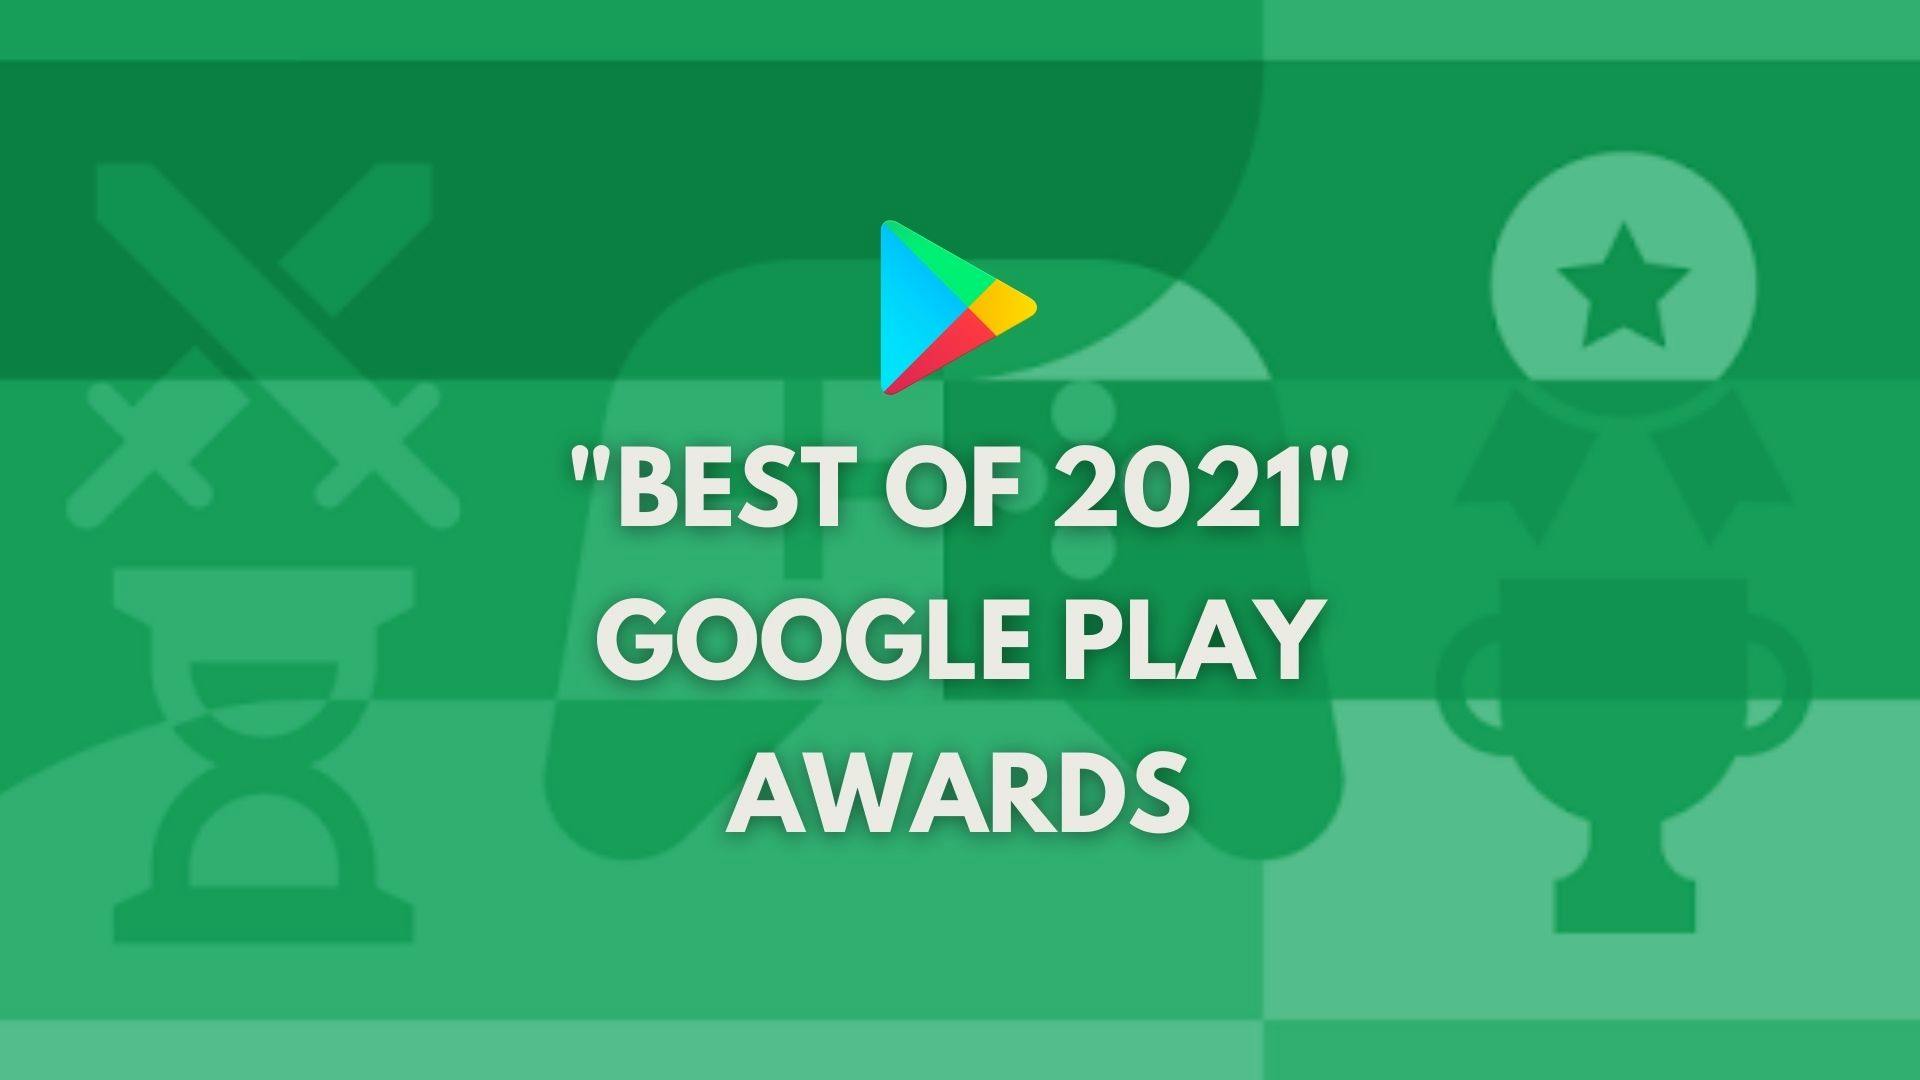 Full lineup of app winners at  "Best of 2021" Google Play Awards